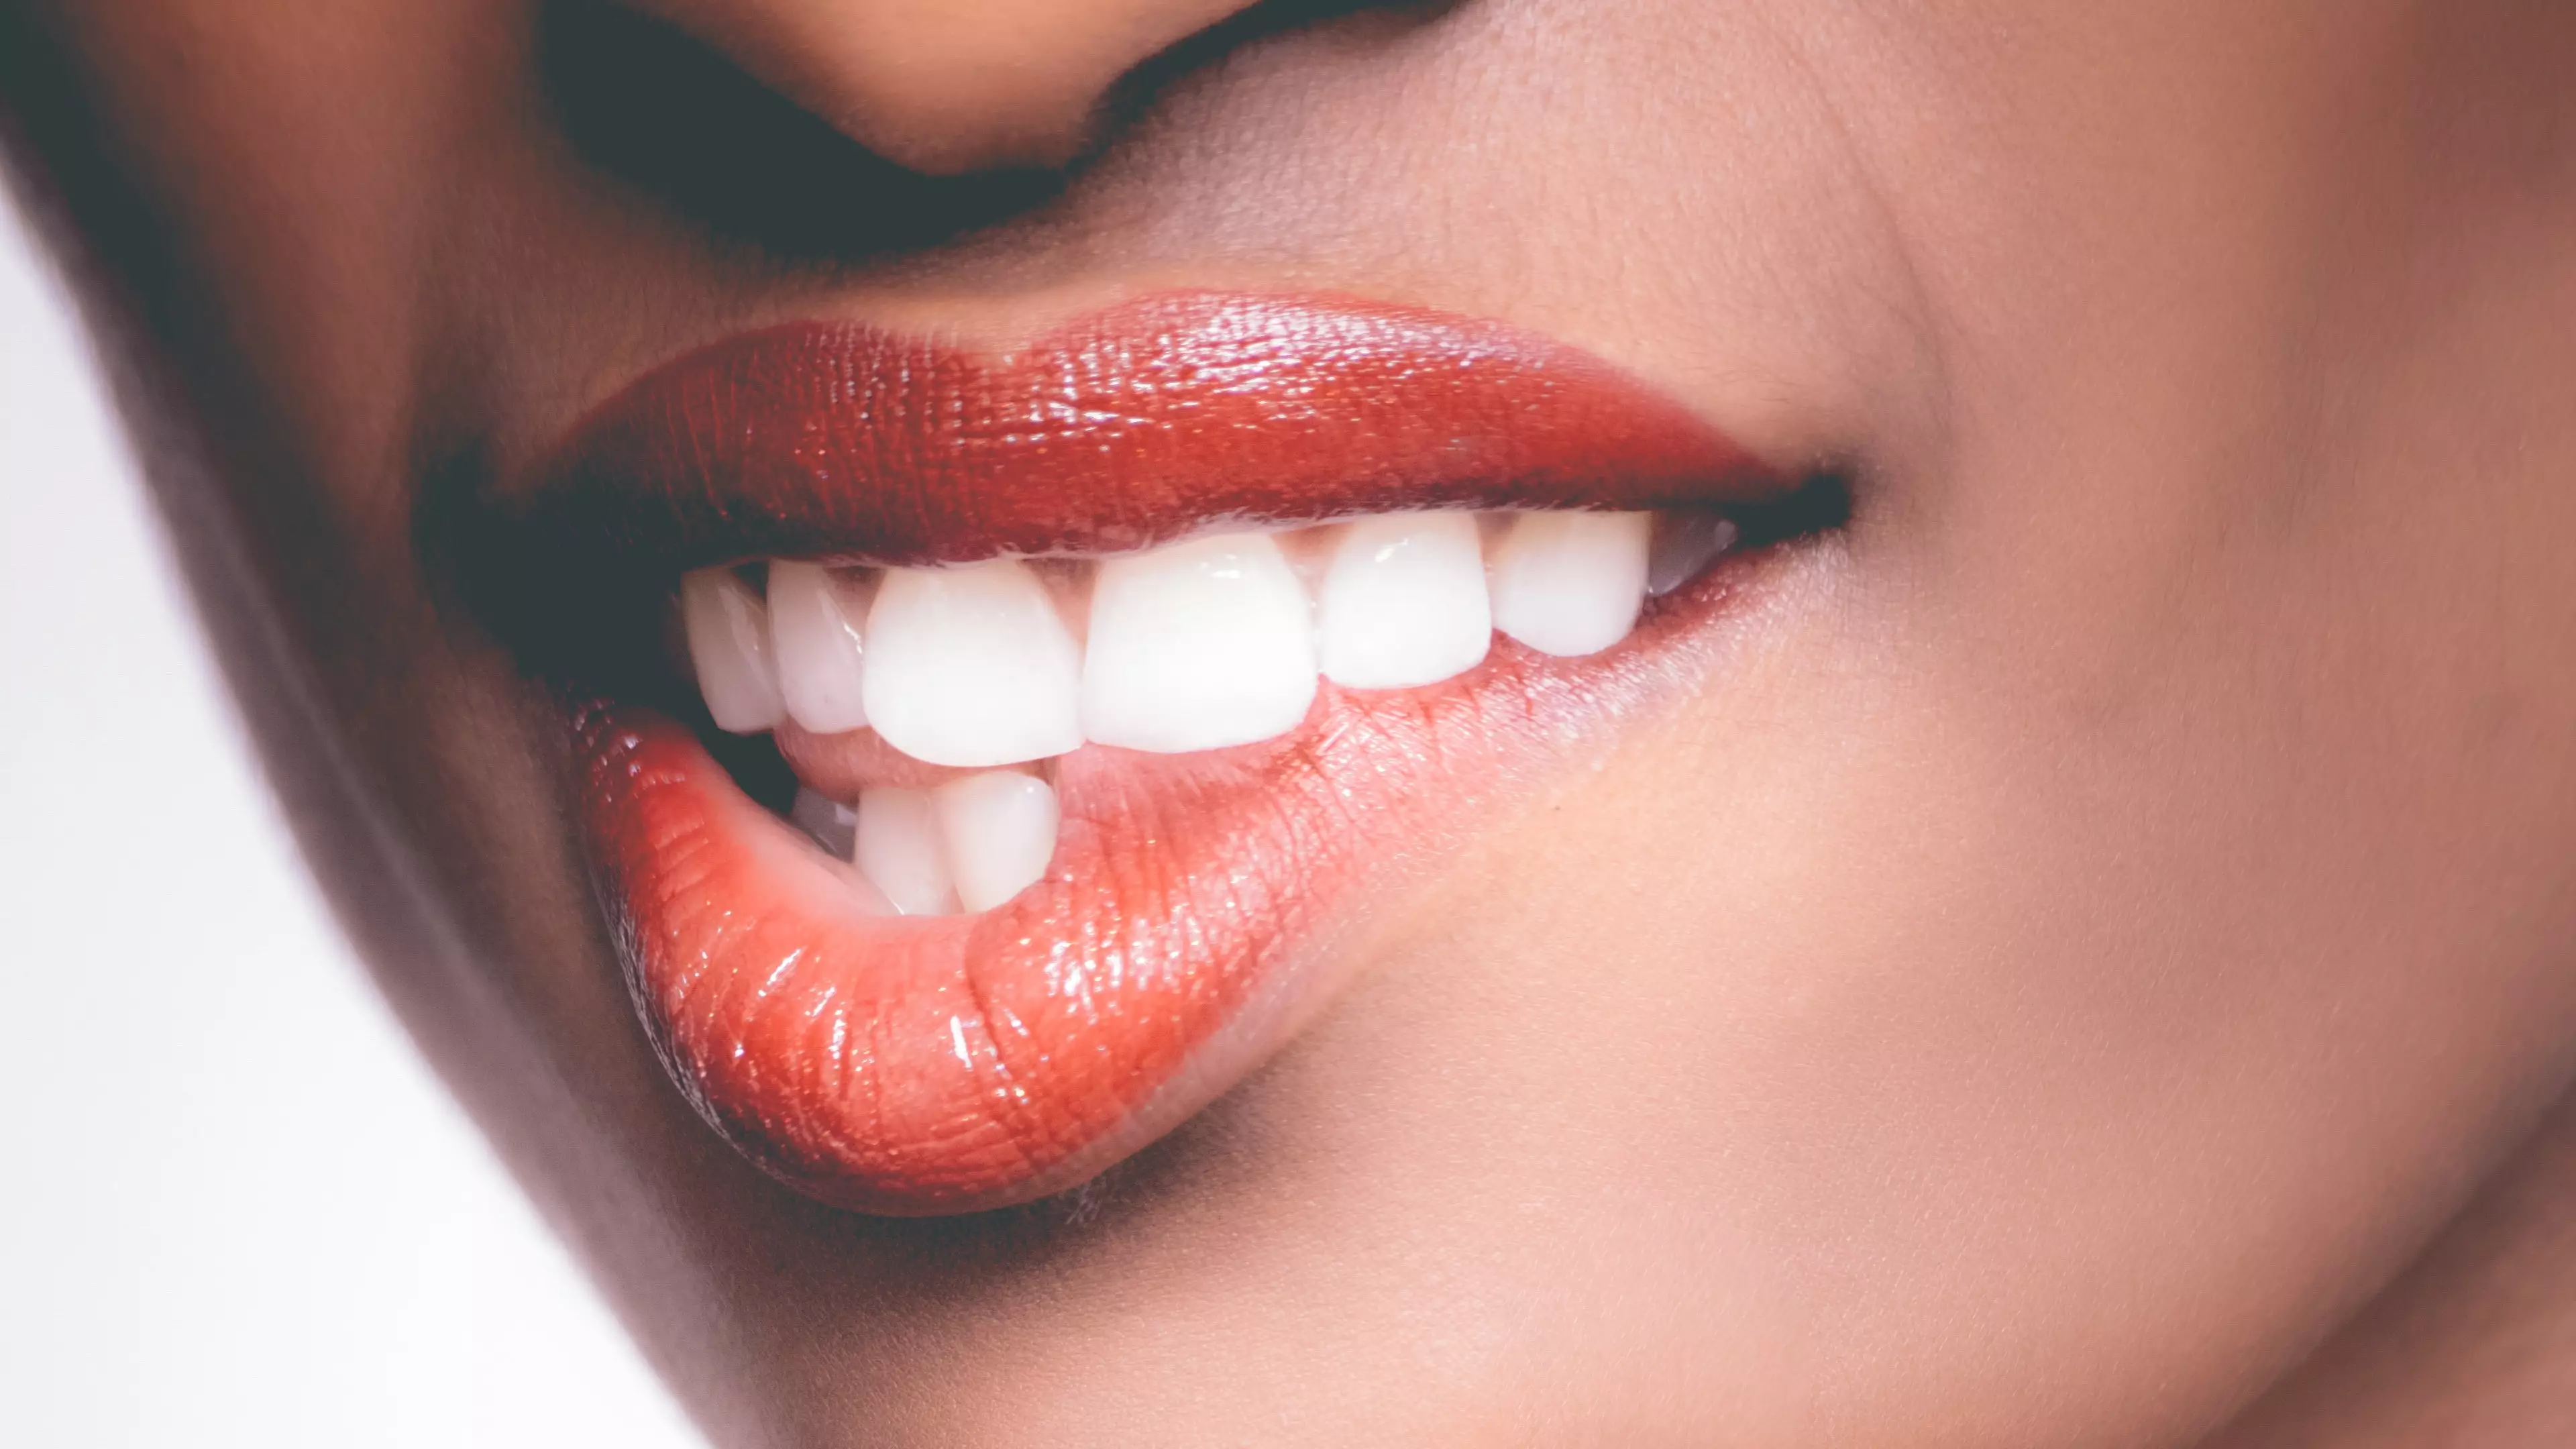 This Teeth-Whitening Brand Will Brighten Your Smile With This One Ingredient